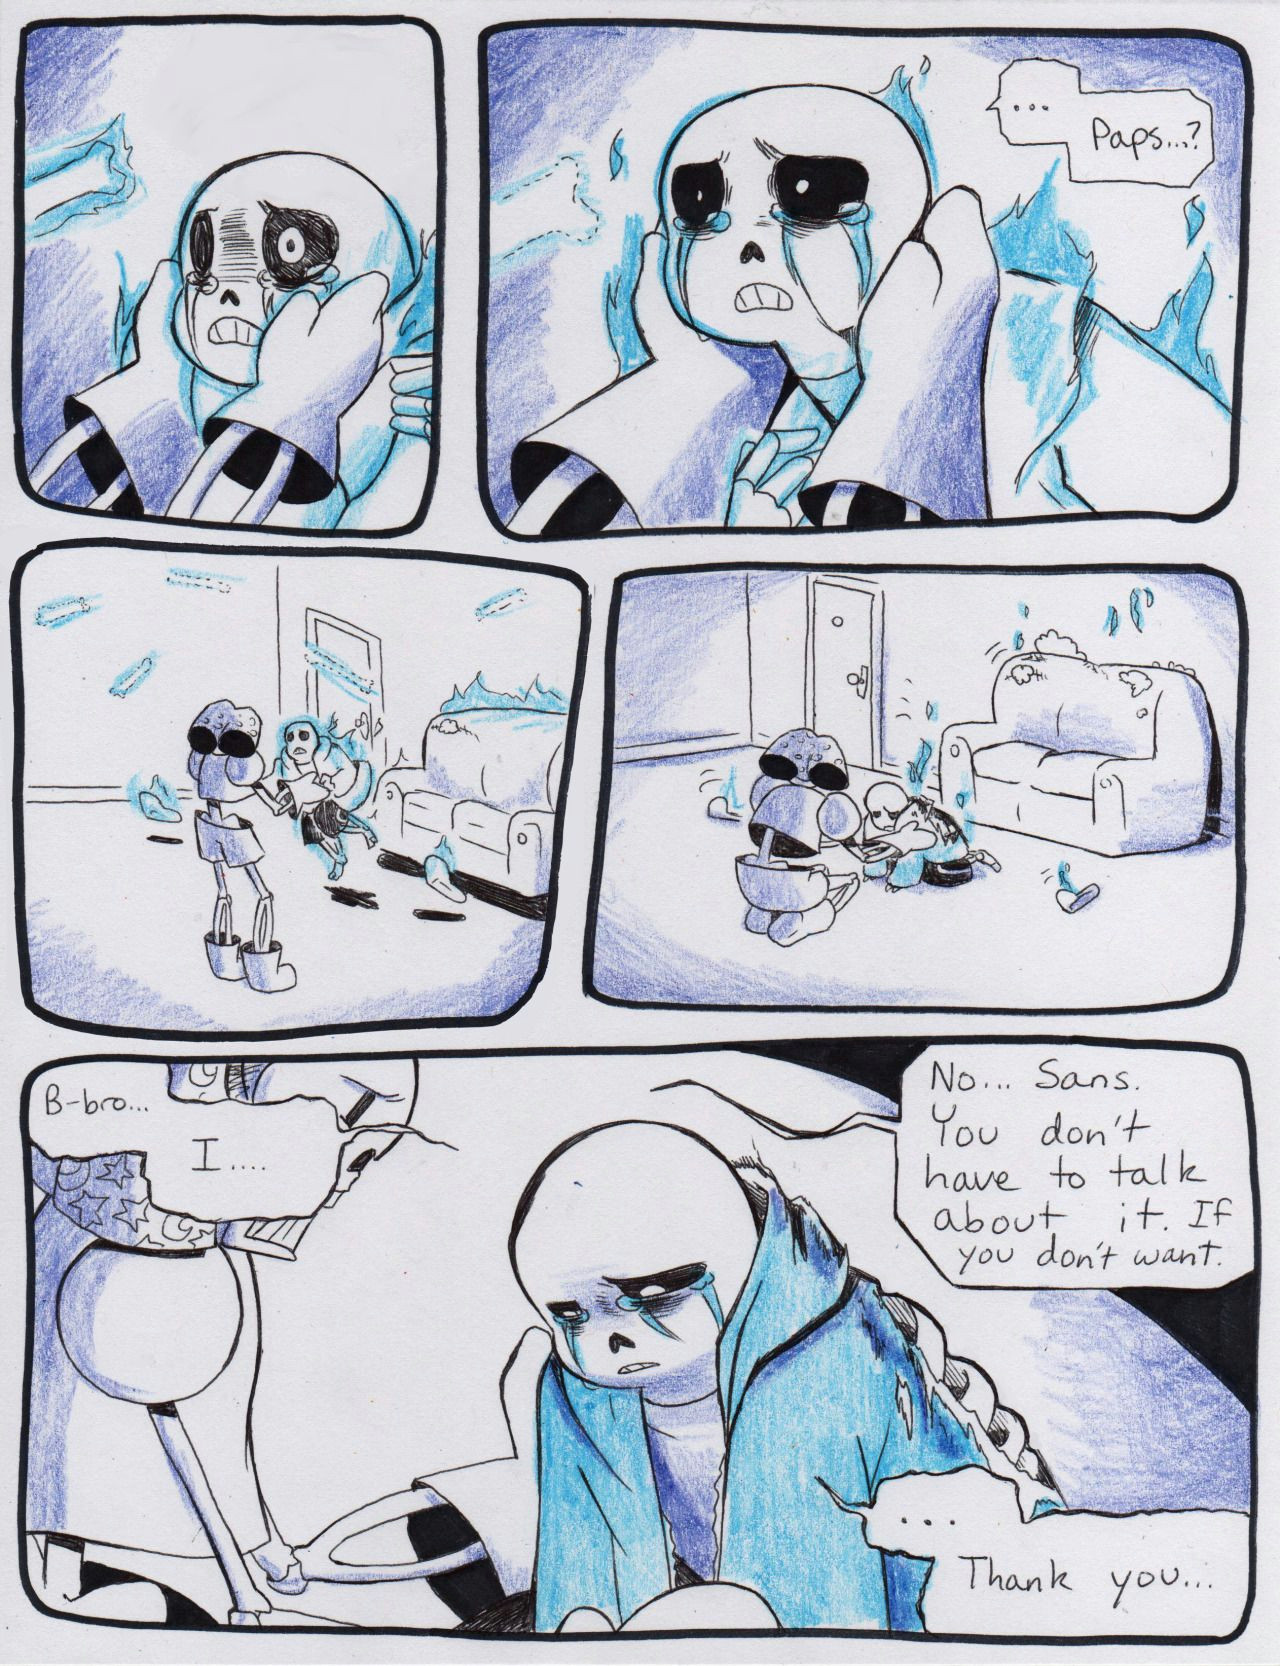 Drawing Cartoons Undertale I Just Draw some Comics Undertale Pinterest Comics Undertale